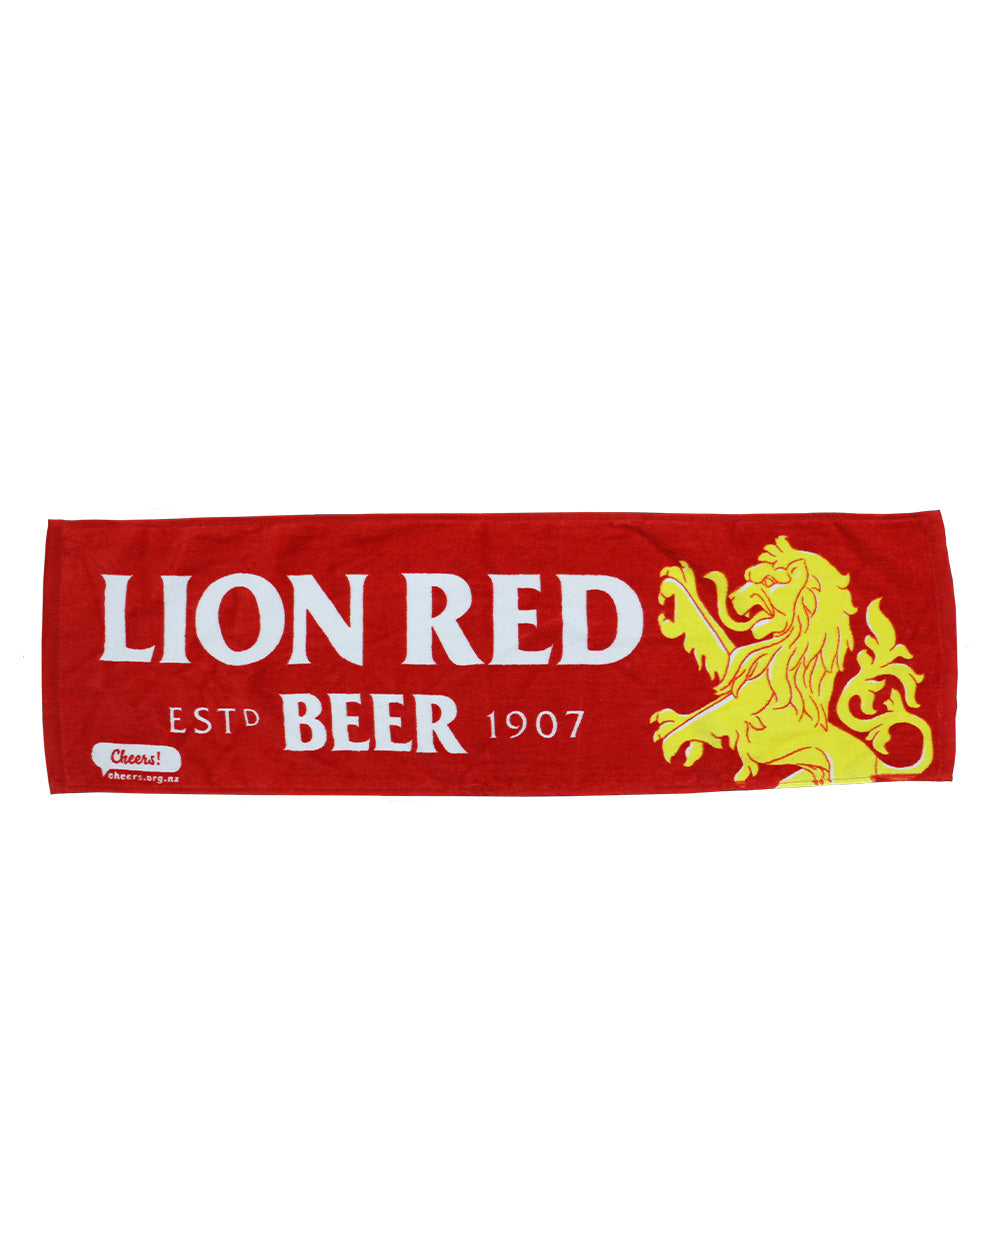 Lion Red Bar Towel -  Beer Gear Apparel & Merchandise - Speights - Lion Red - VB - Tokyo Dy merch